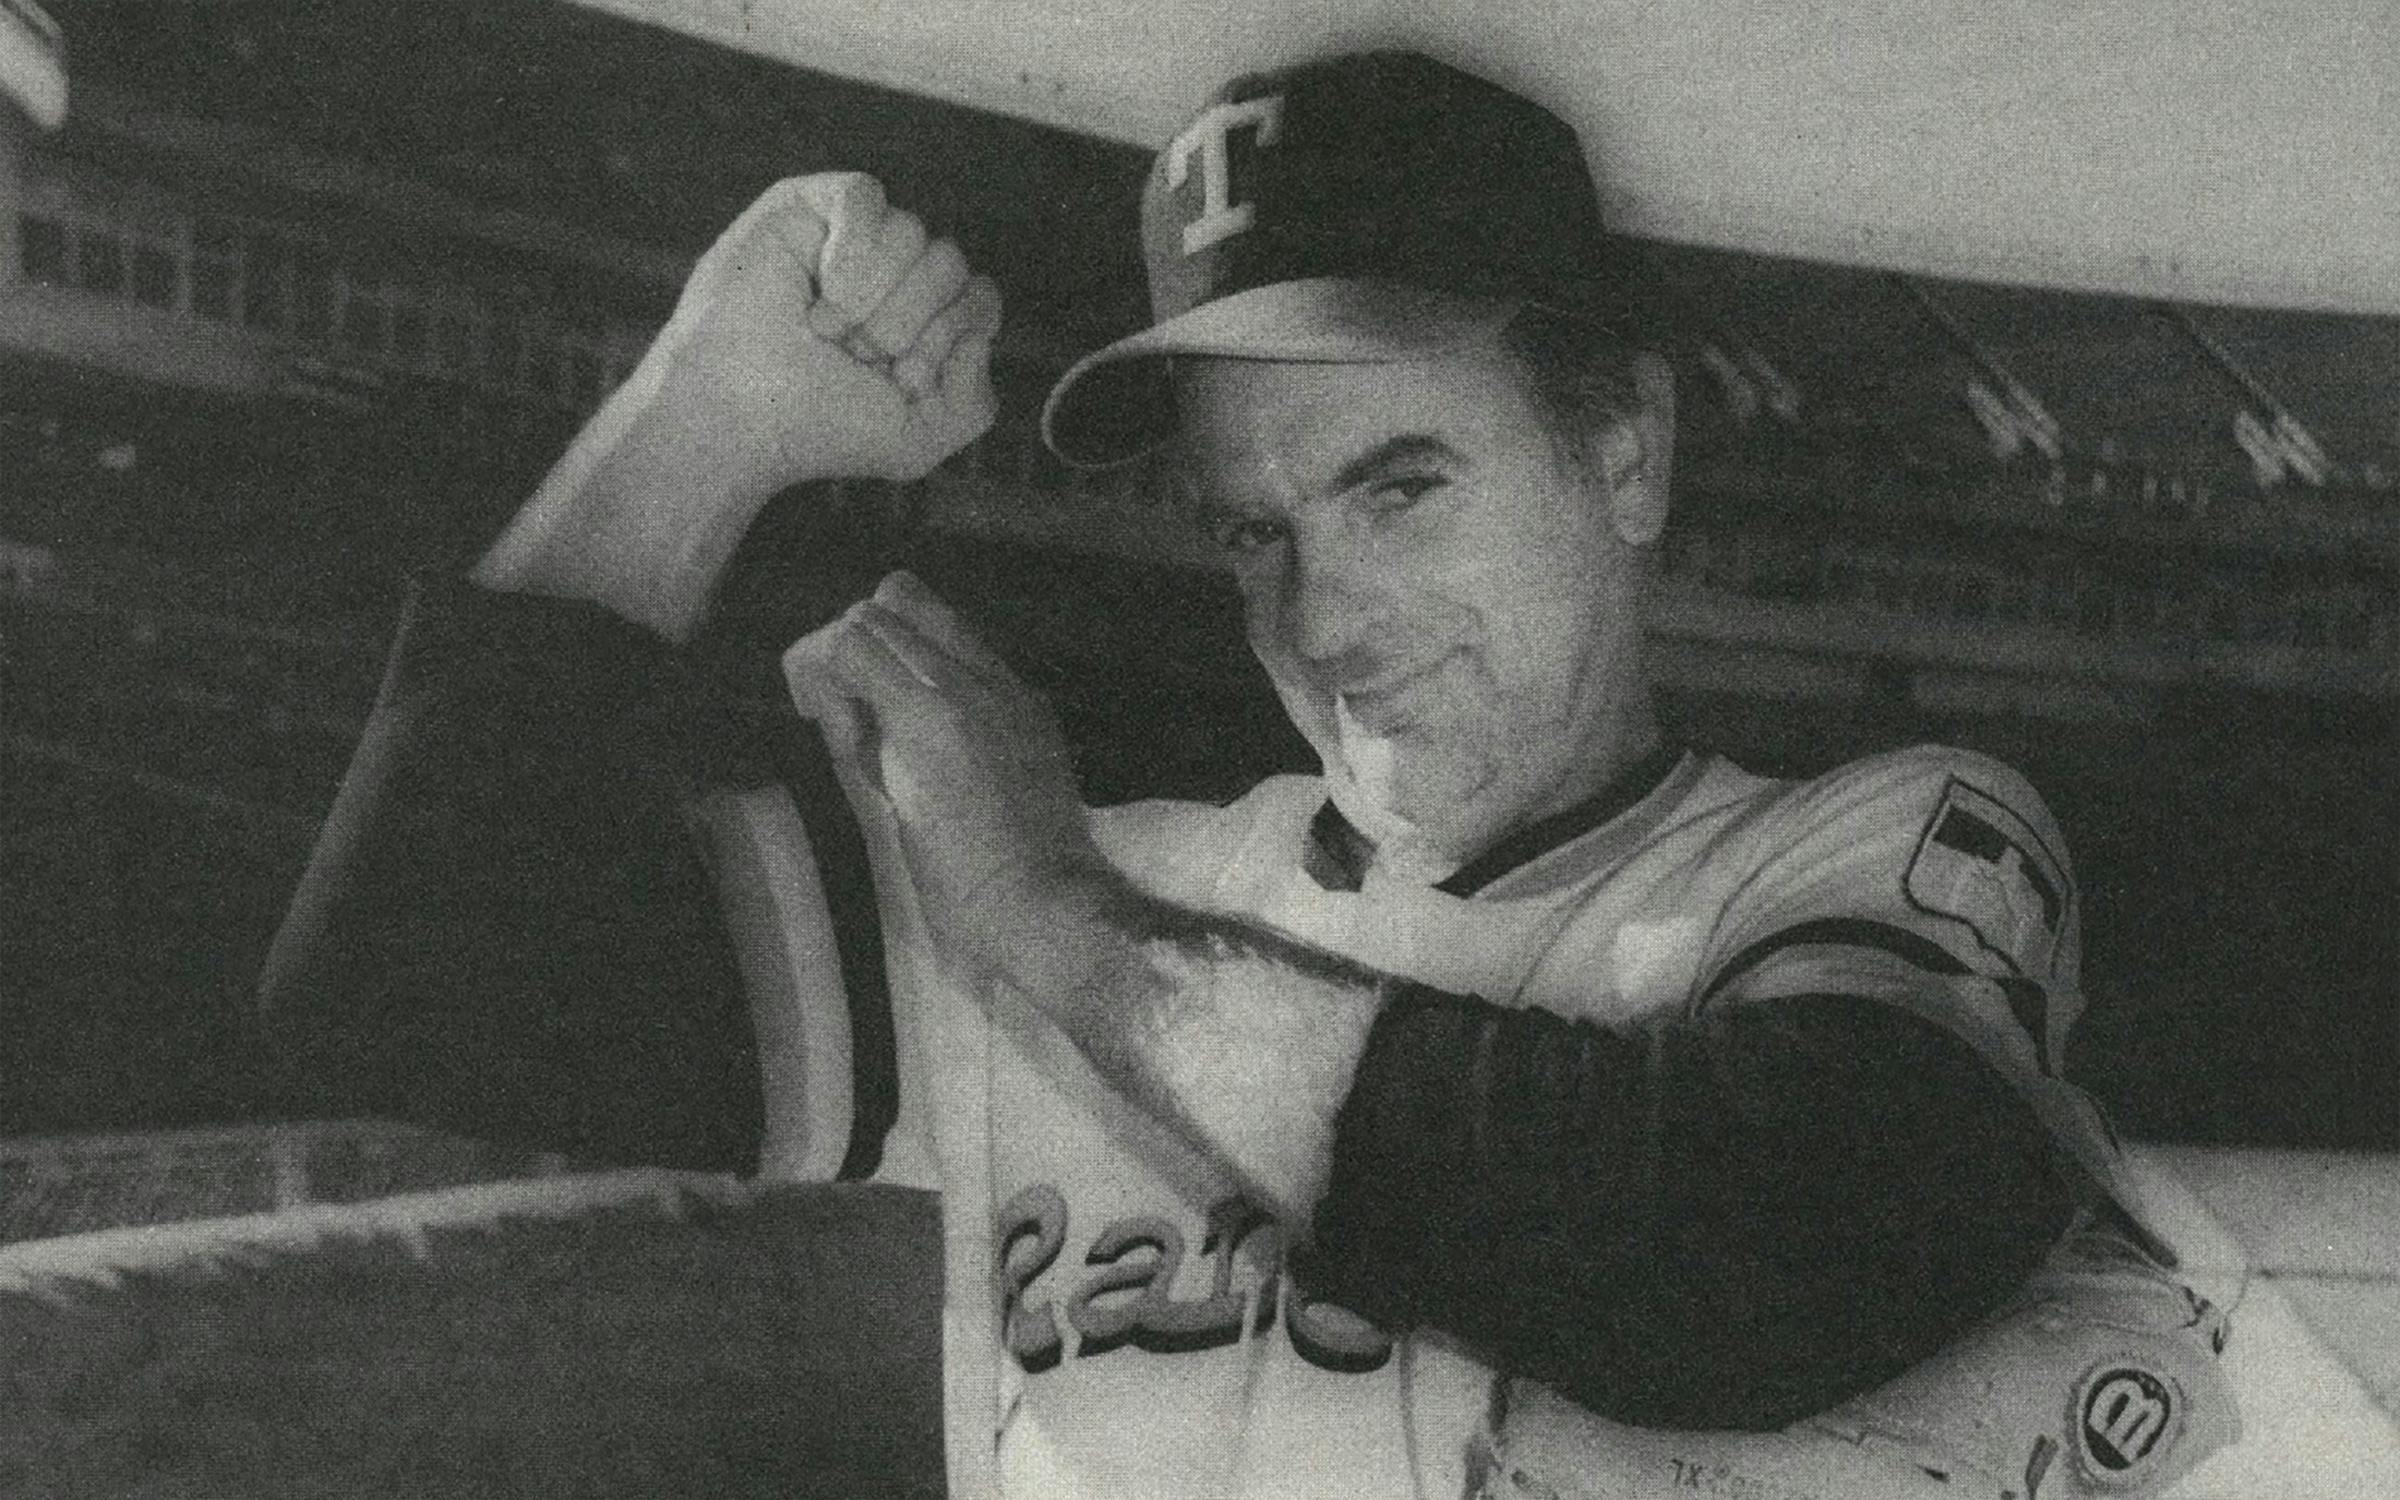 Gaylord Perry, MLB's spitball artist and Hall of Fame pitcher